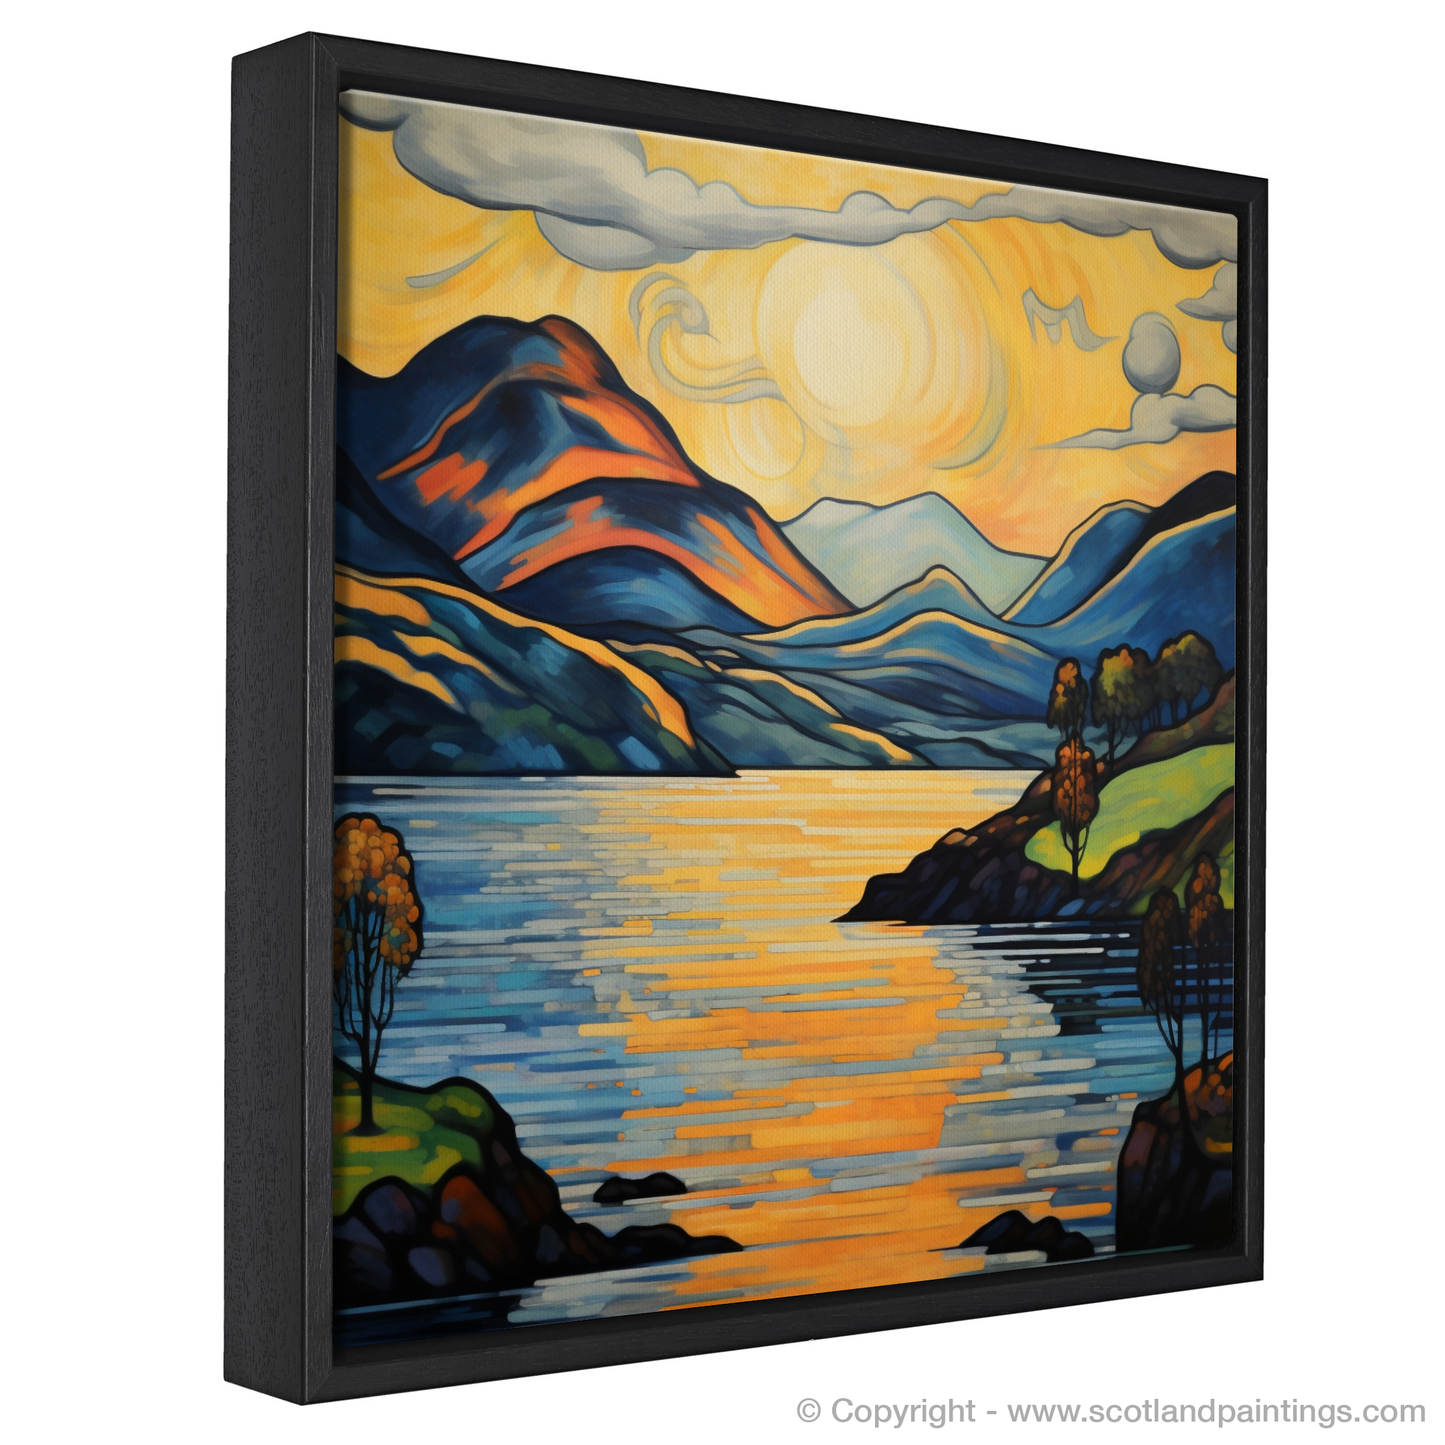 Painting and Art Print of Loch Lomond entitled "Golden Hour at Loch Lomond: An Art Nouveau Tribute".